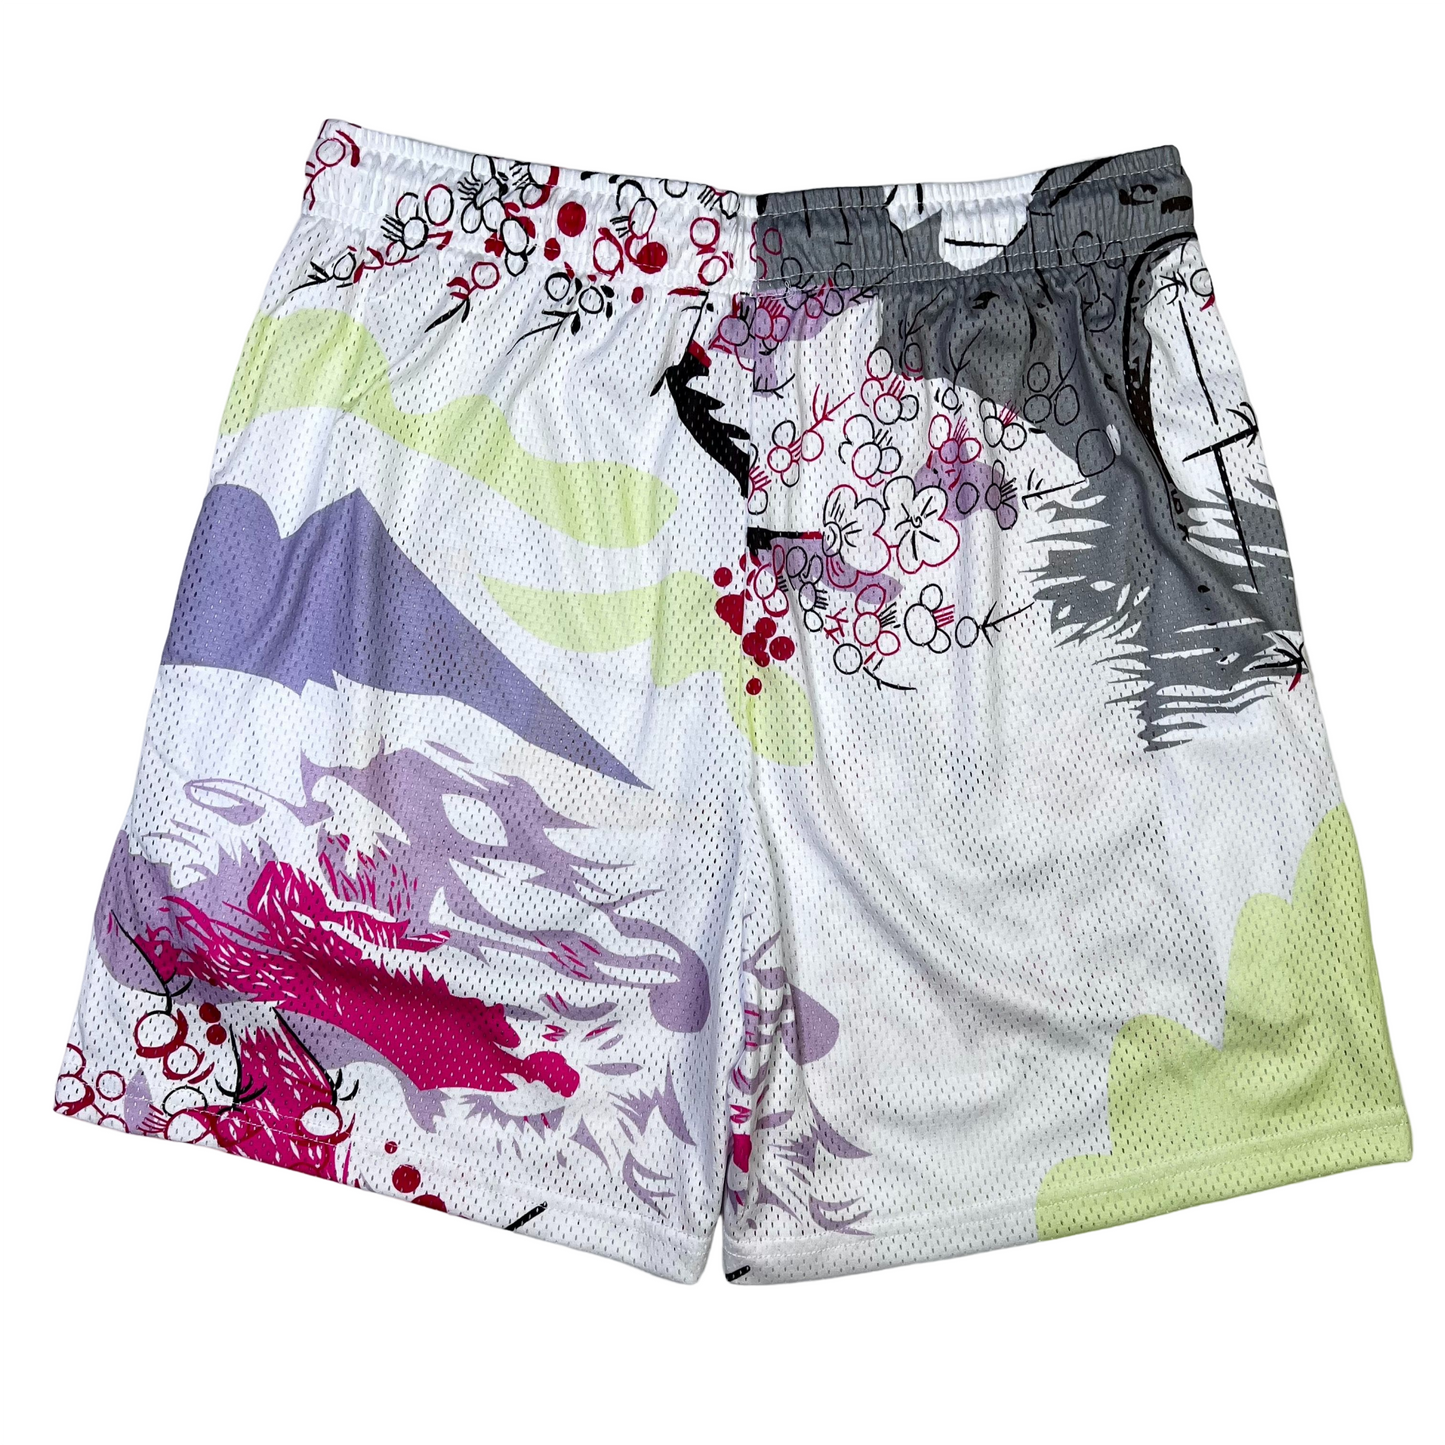 GZ Miami South Shore ✥𝔾𝕣𝕠𝕦𝕟𝕕ℤ𝕖𝕣𝕠®✥2023 Southern suit boss/GZ American casual neutral sports outdoor love peach blossom spring four-point shorts and ball pants 